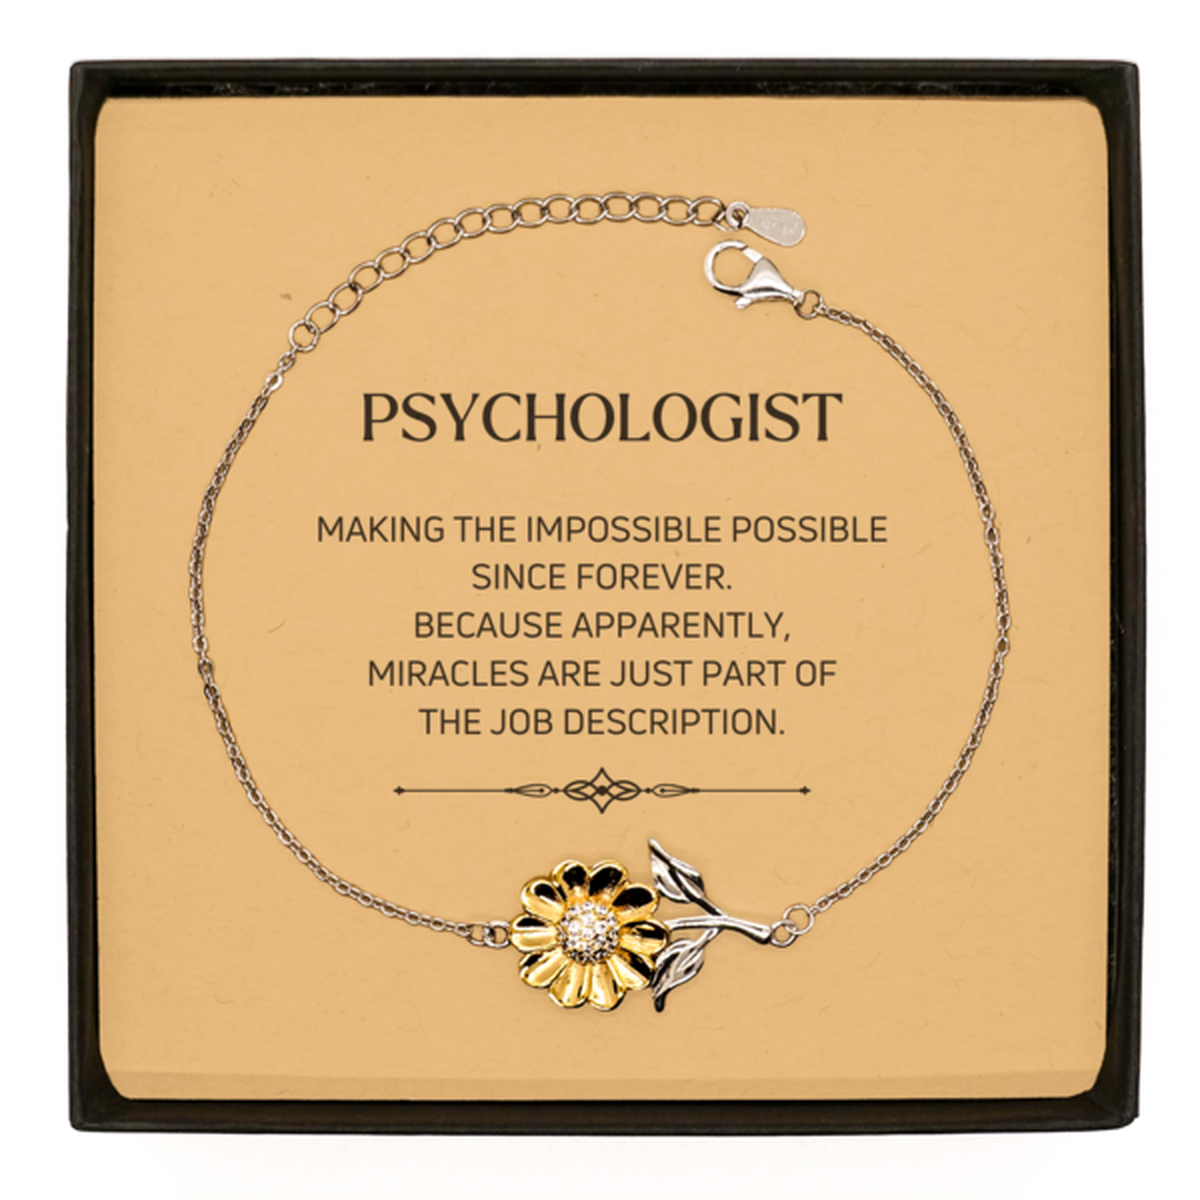 Funny Psychologist Gifts, Miracles are just part of the job description, Inspirational Birthday Sunflower Bracelet For Psychologist, Men, Women, Coworkers, Friends, Boss